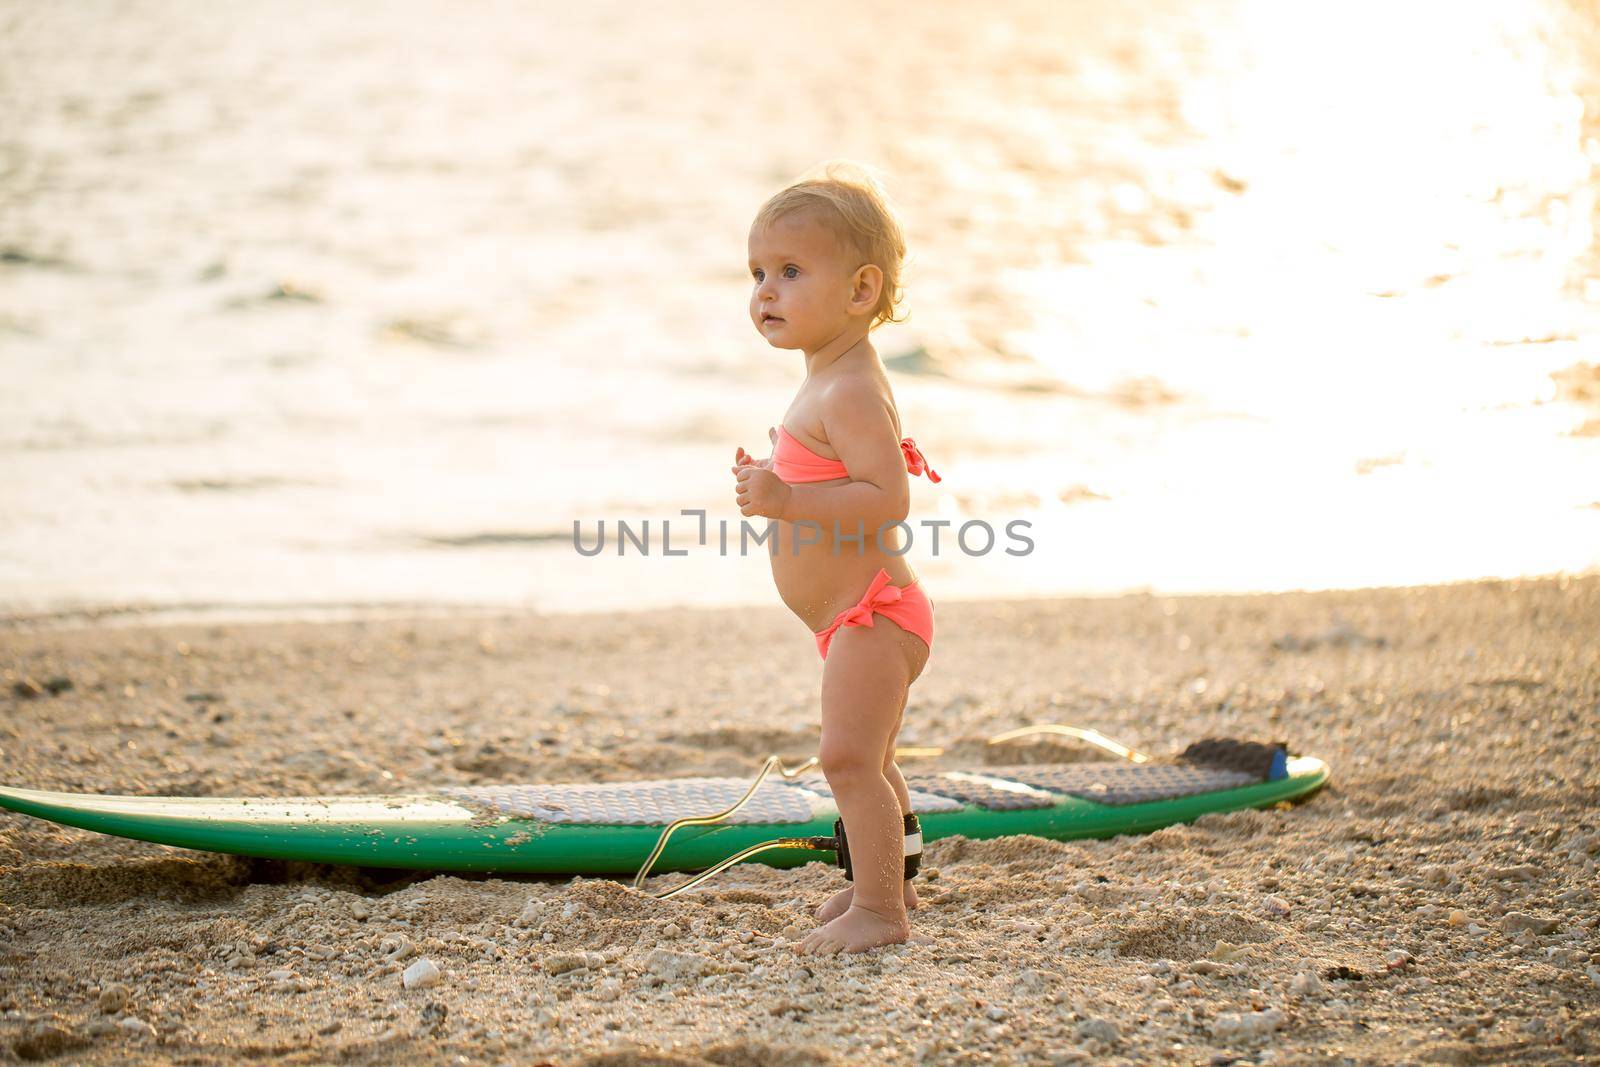 A little girl learns to surf on the ocean